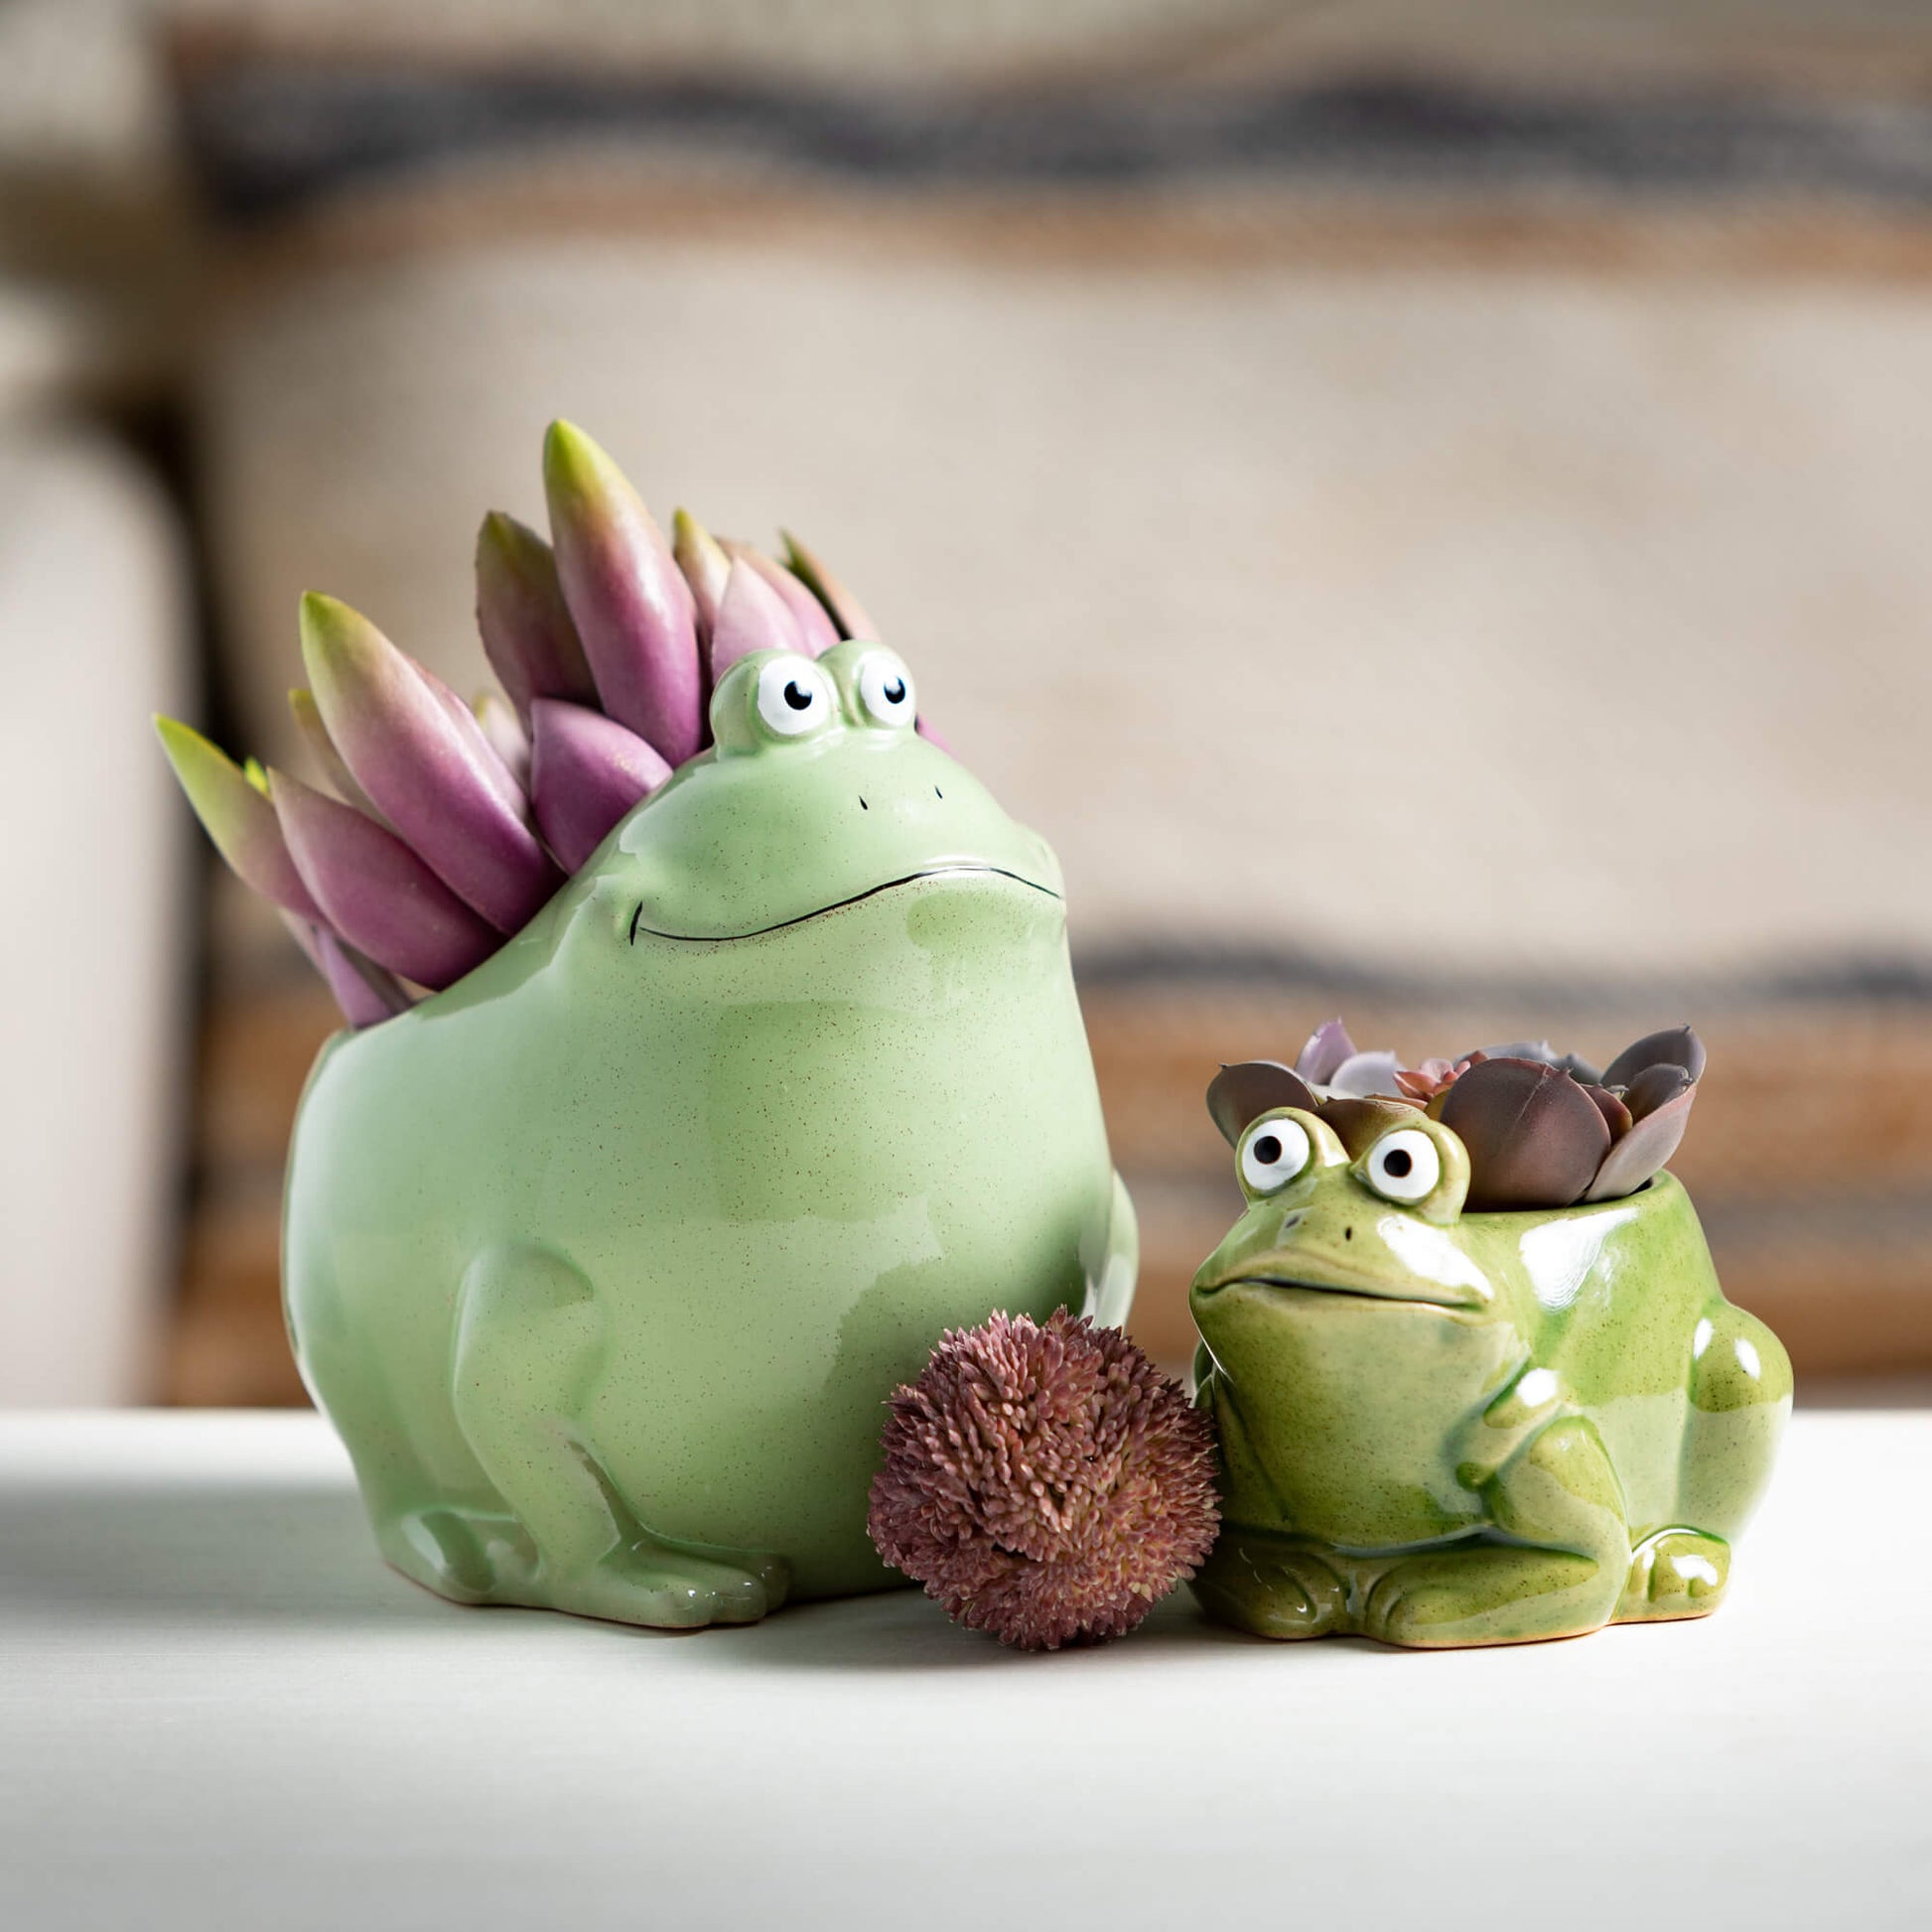 2 sizes of green toad planters filled with succulents.